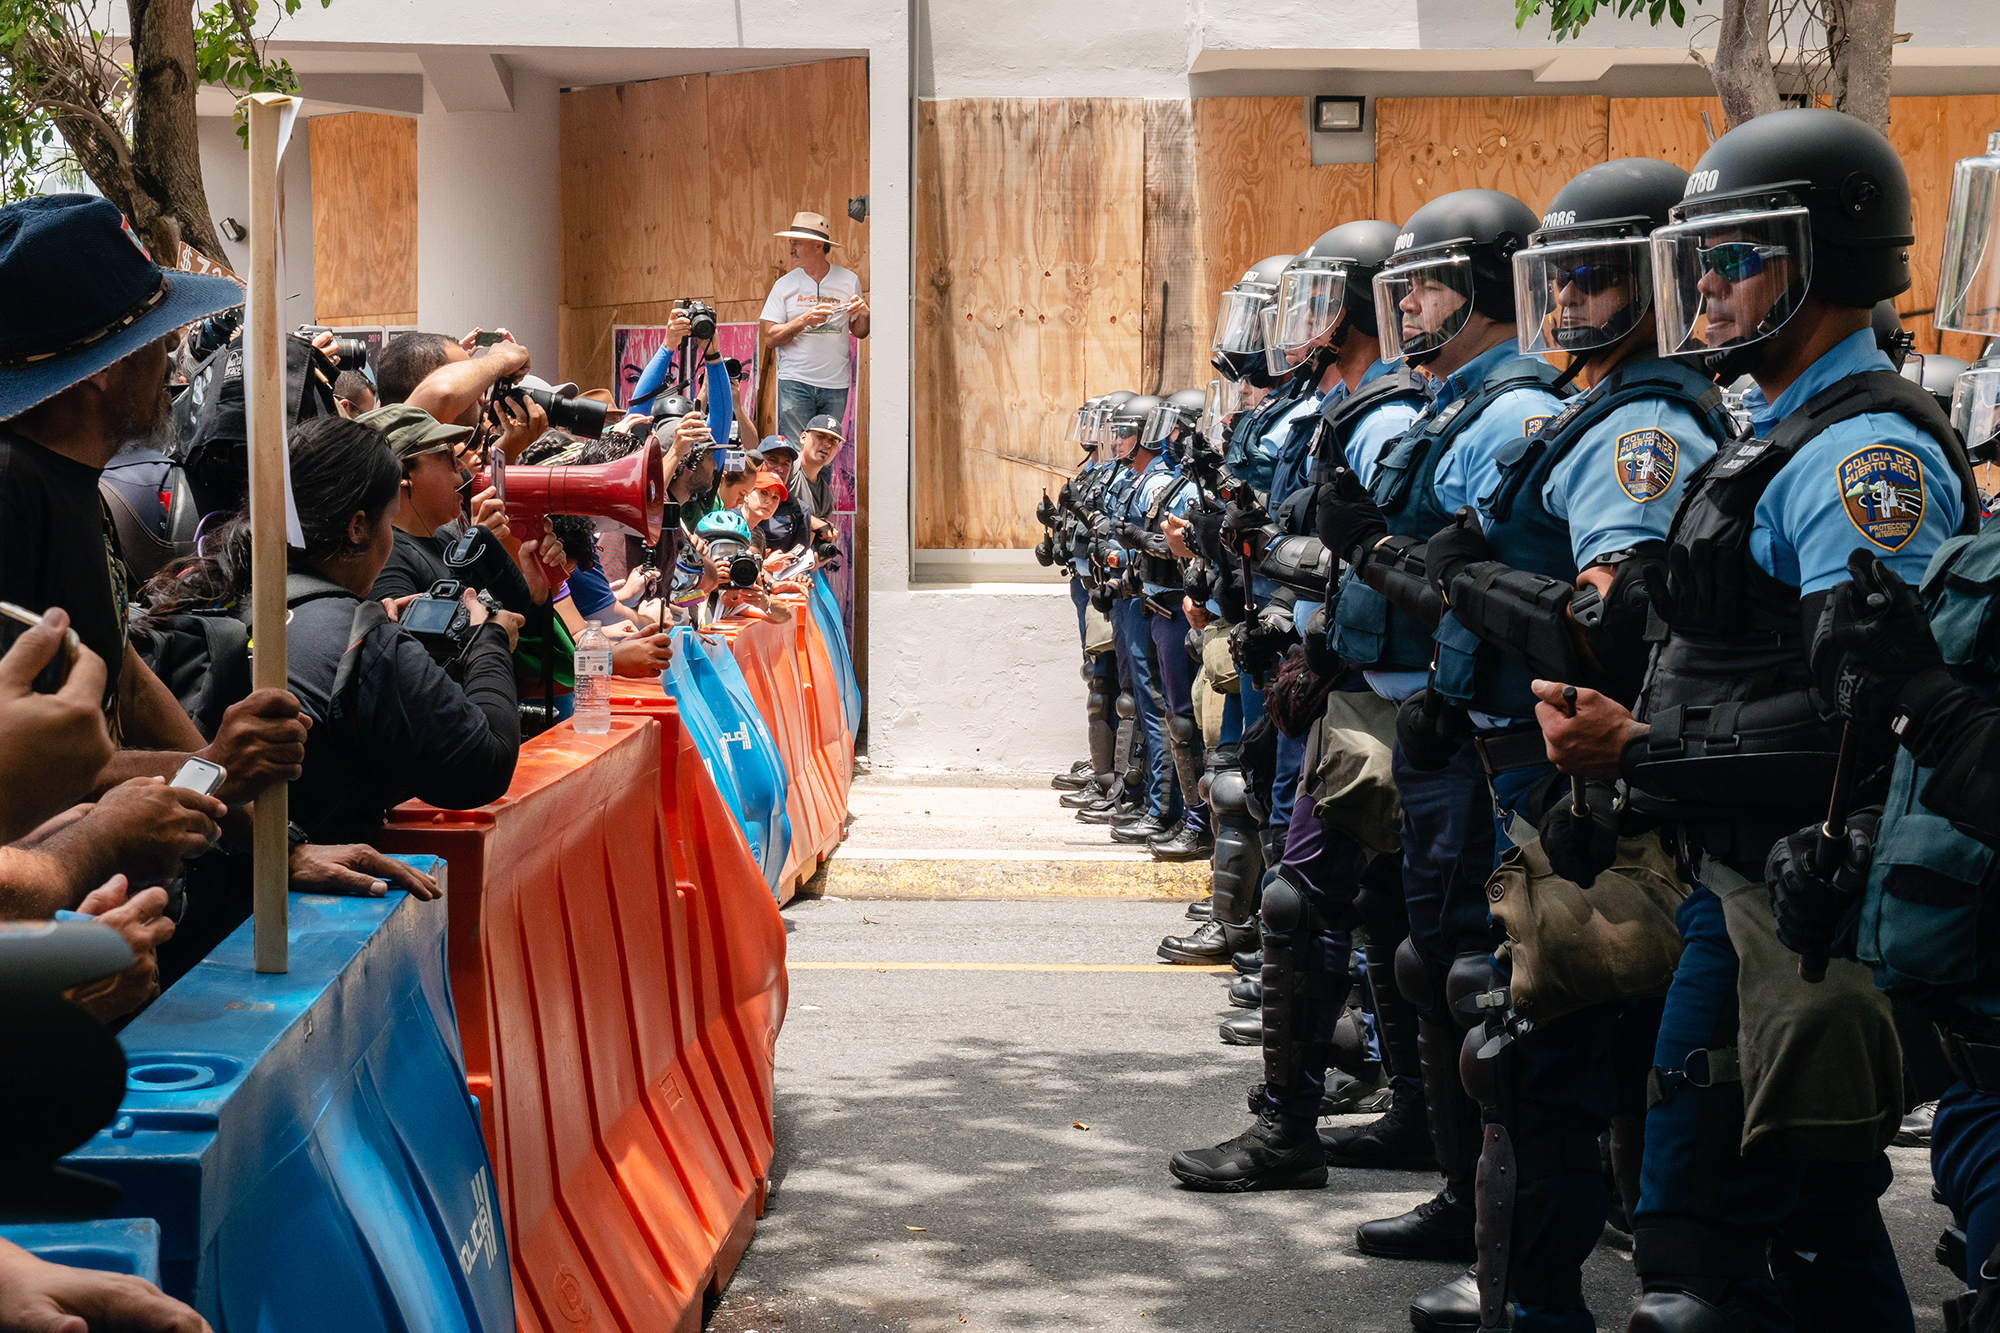 Demonstrators face off with police during the 2019 May Day demonstrations. (photo by Roque Nonini)